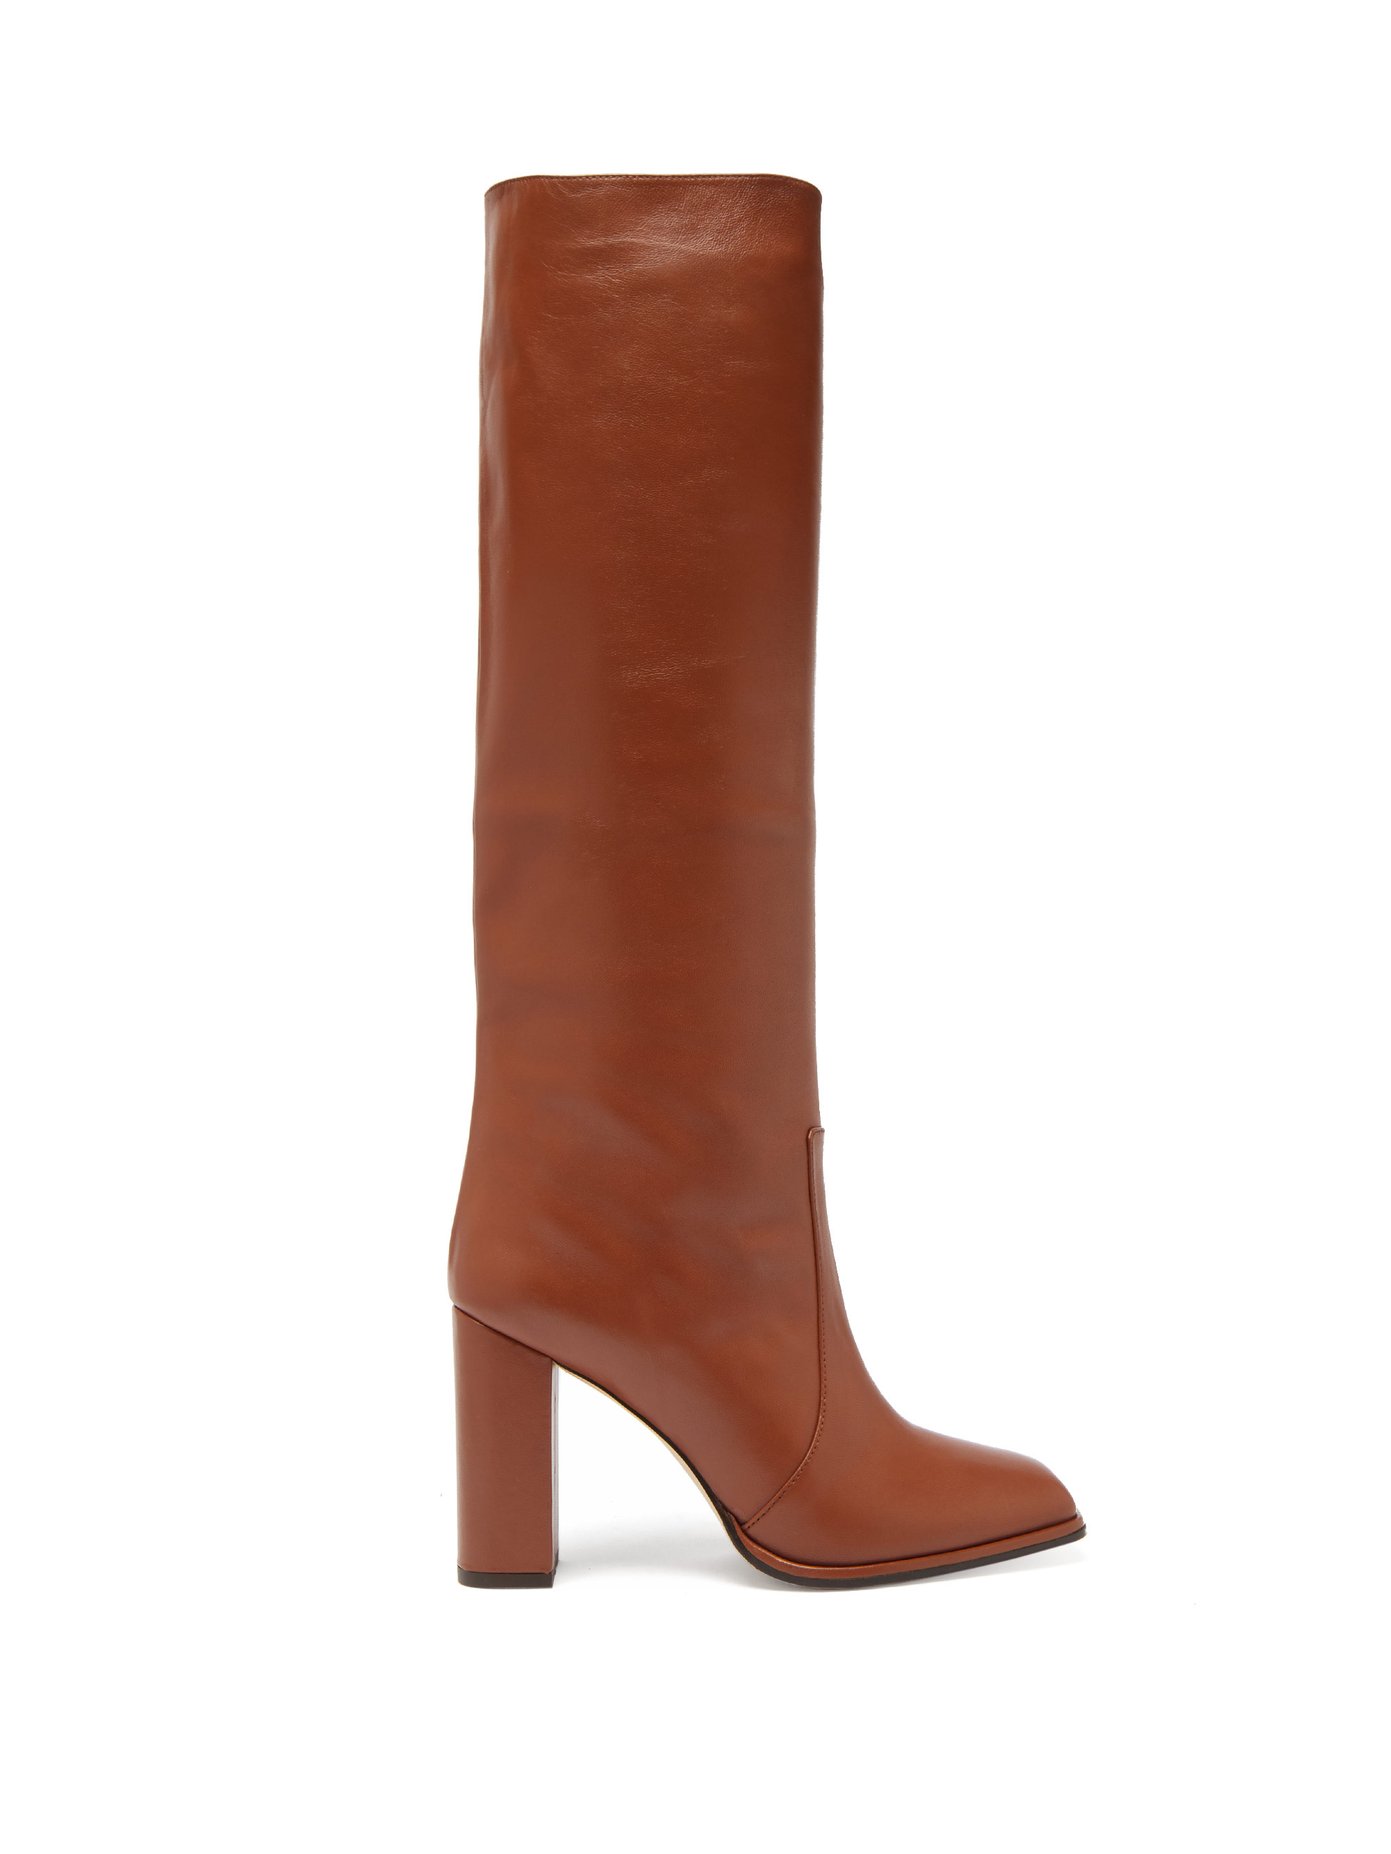 Knee-high leather boots | Paris Texas 